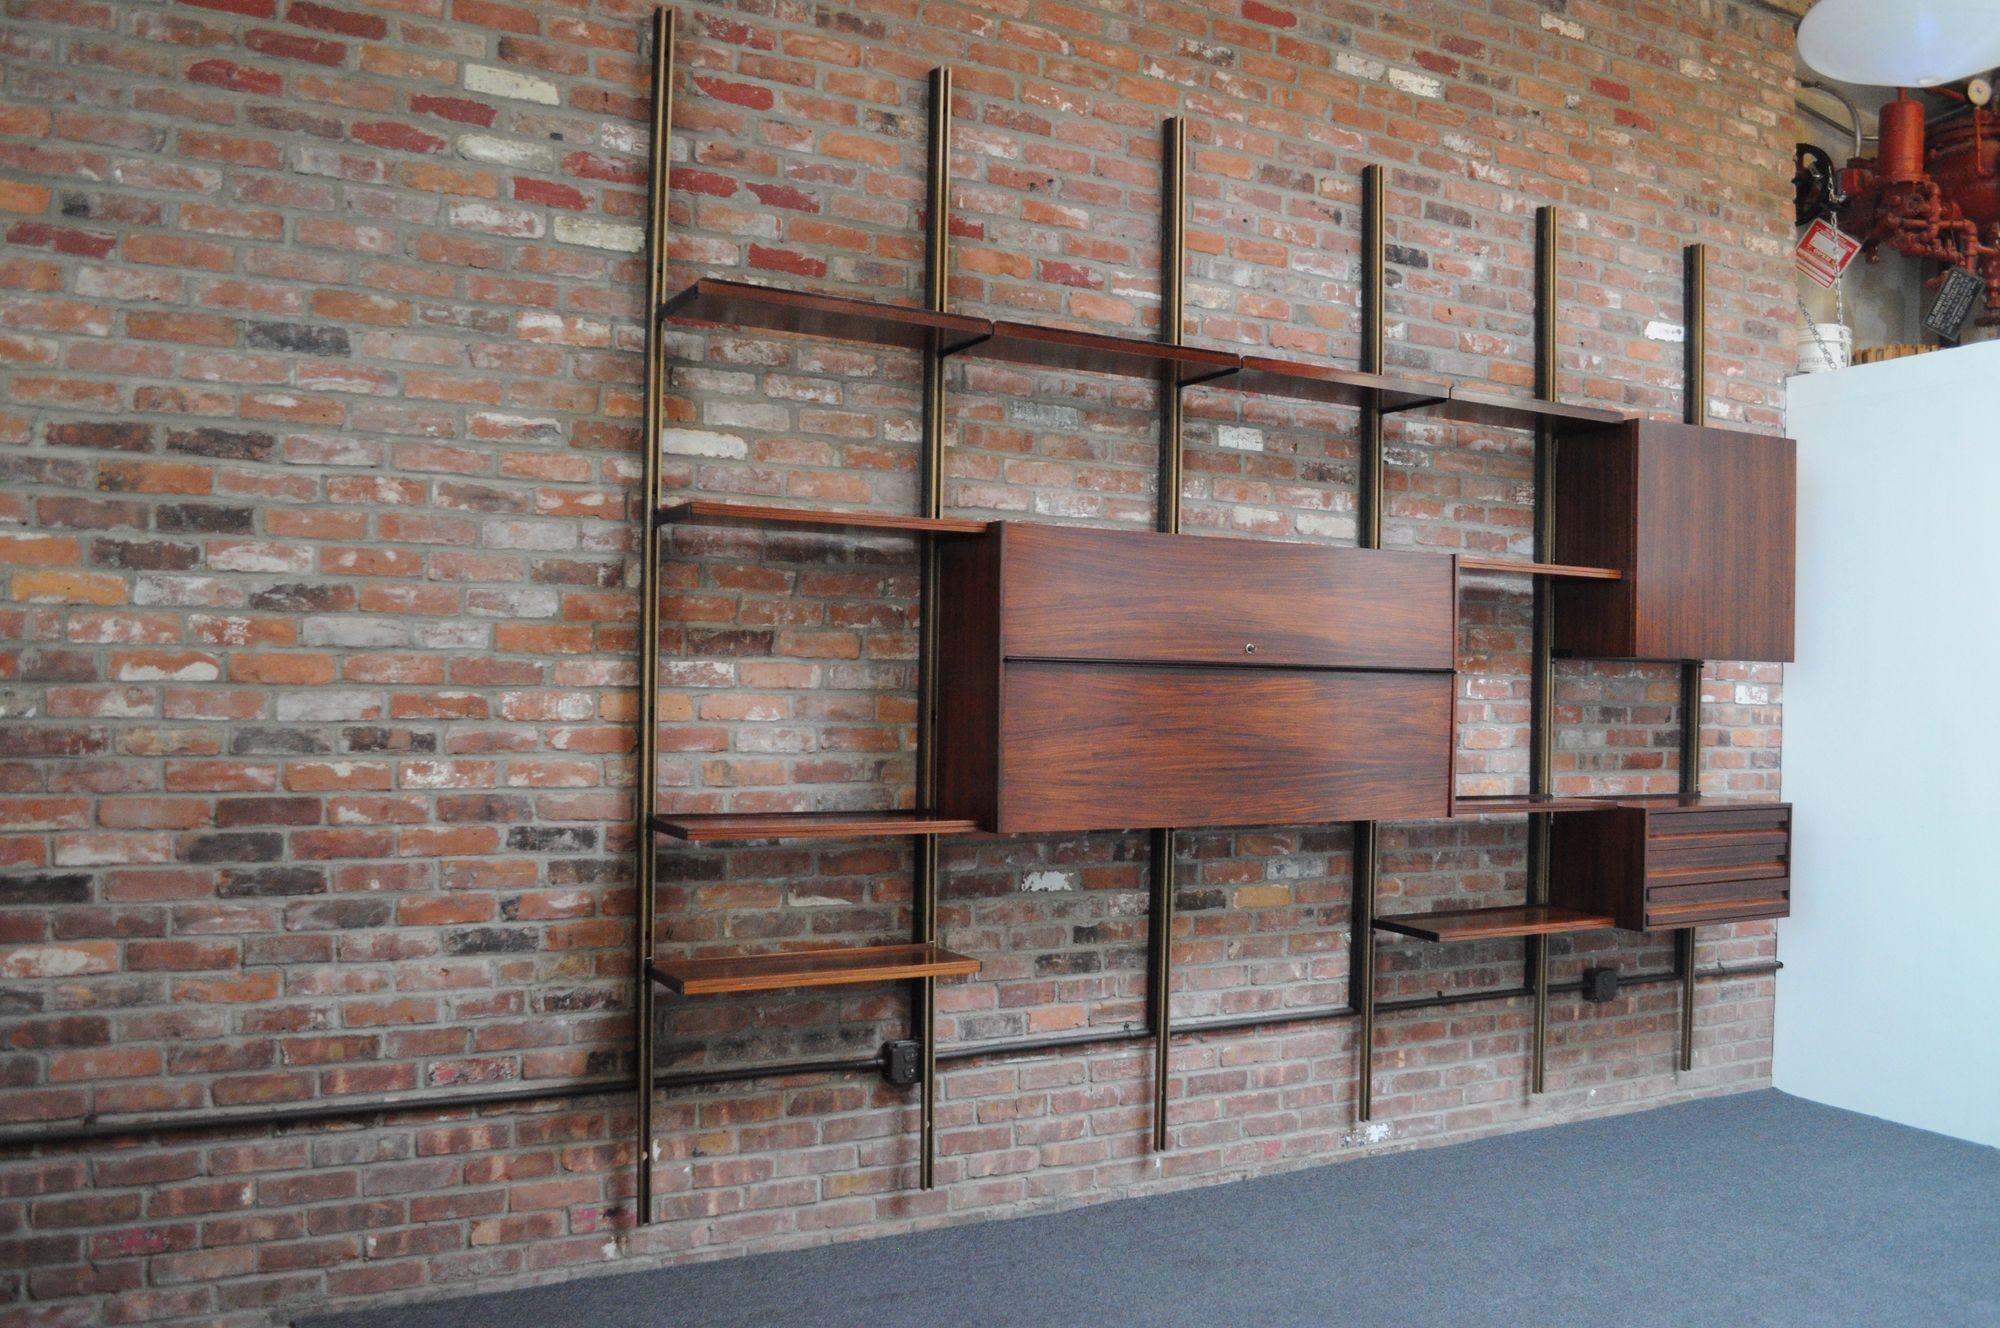 Large modular rosewood bookcase/wall unit by Osvaldo Borsani for Tecno (ca. 1960, Italy).
Composed of six gold aluminum uprights forming five bays/sections.
Includes:
-locking bar unit with a removable (non-adjustable) shelf and glass